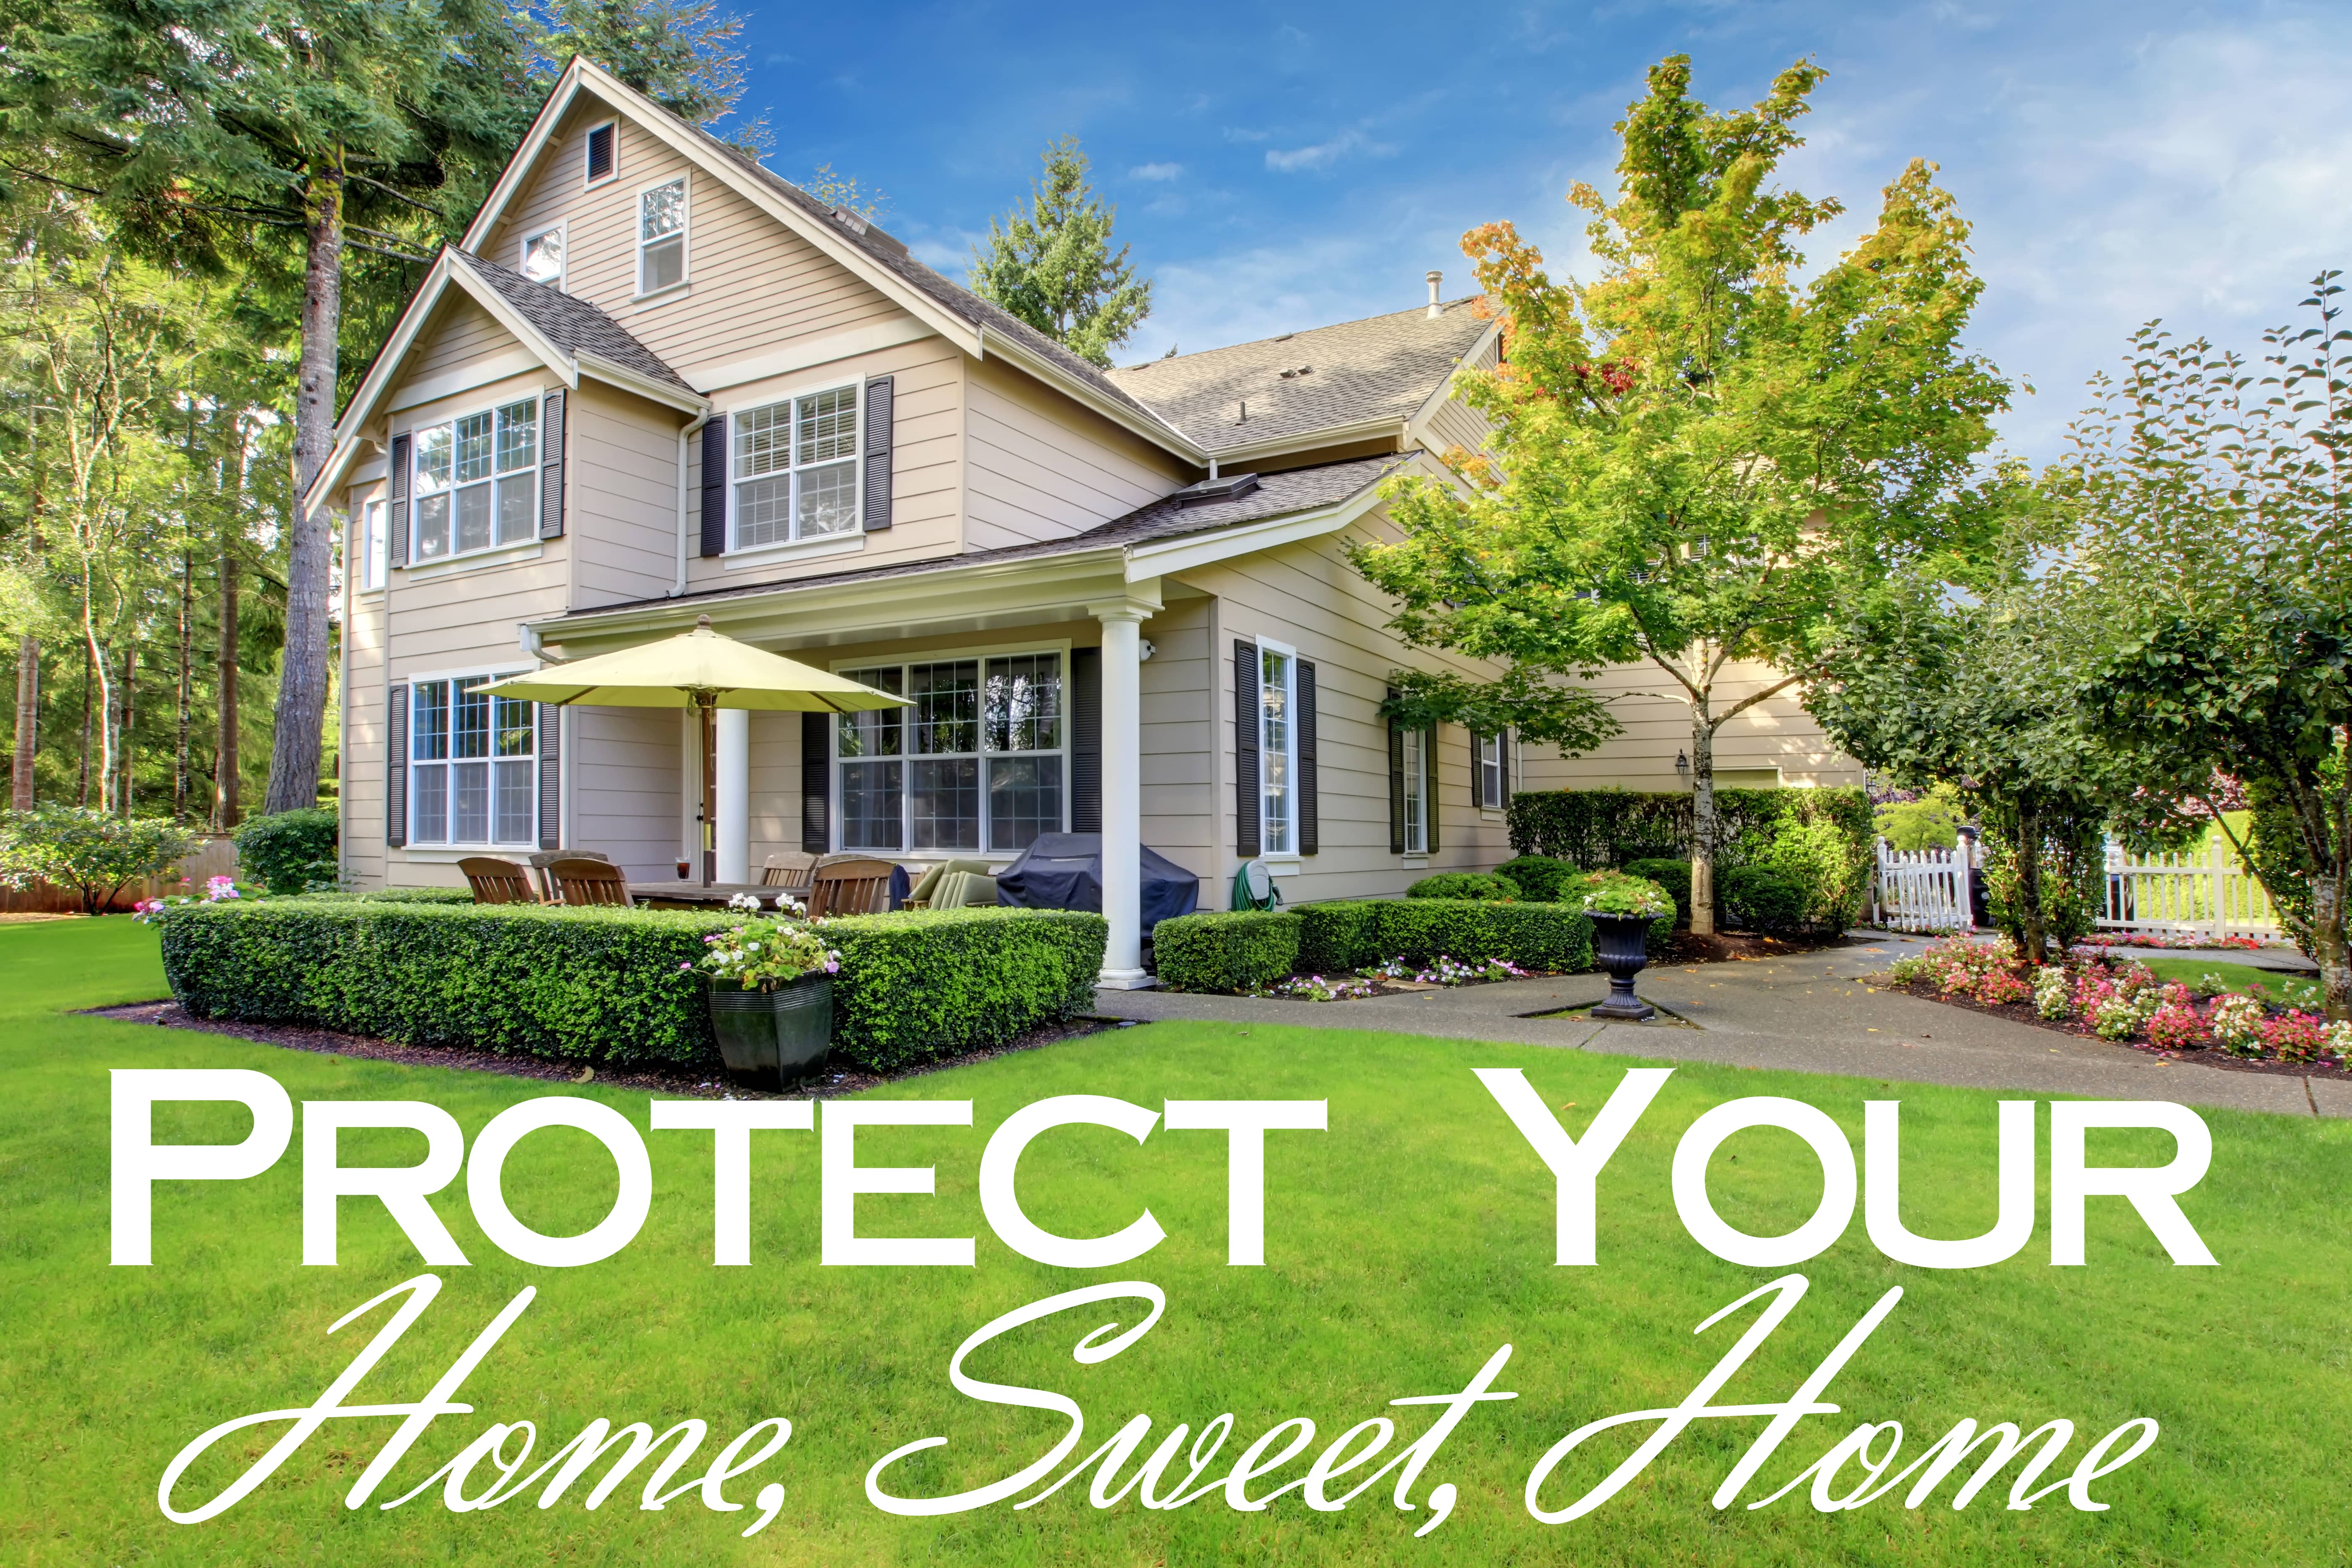 Home, Sweet, Home American Insurance Specialist